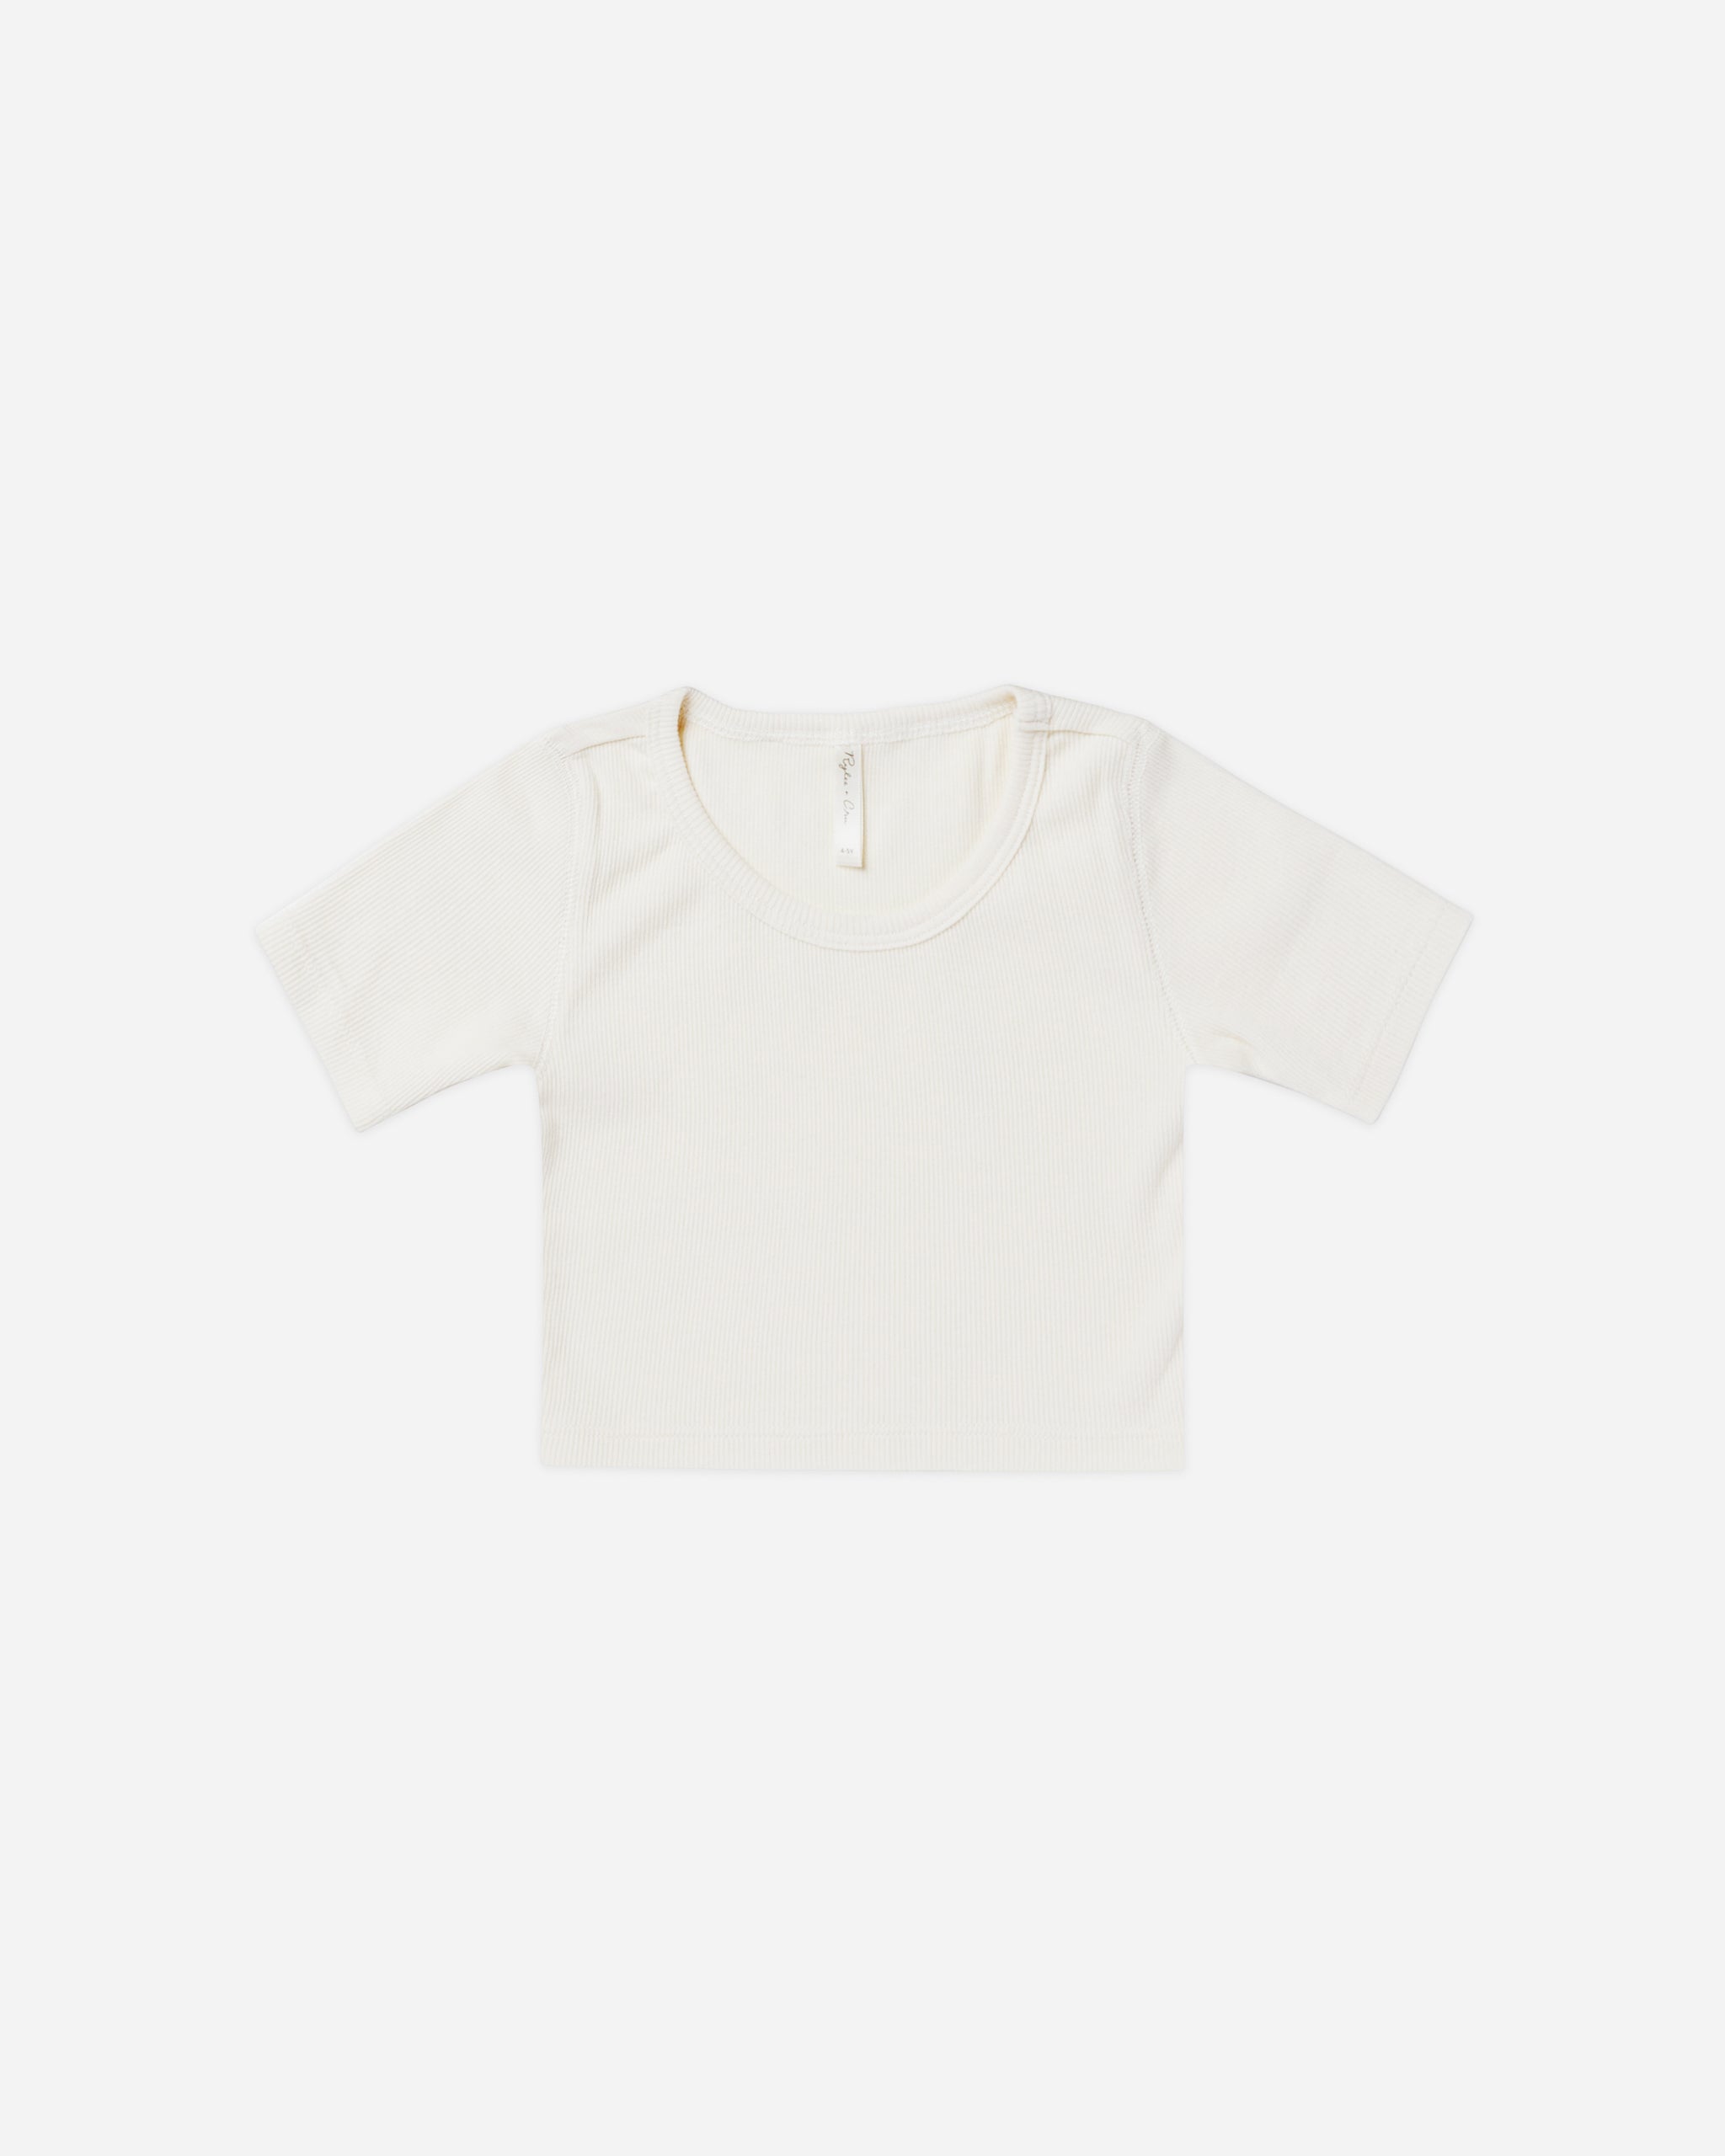 Ribbed Scoop Tee || Ivory - Rylee + Cru | Kids Clothes | Trendy Baby Clothes | Modern Infant Outfits |